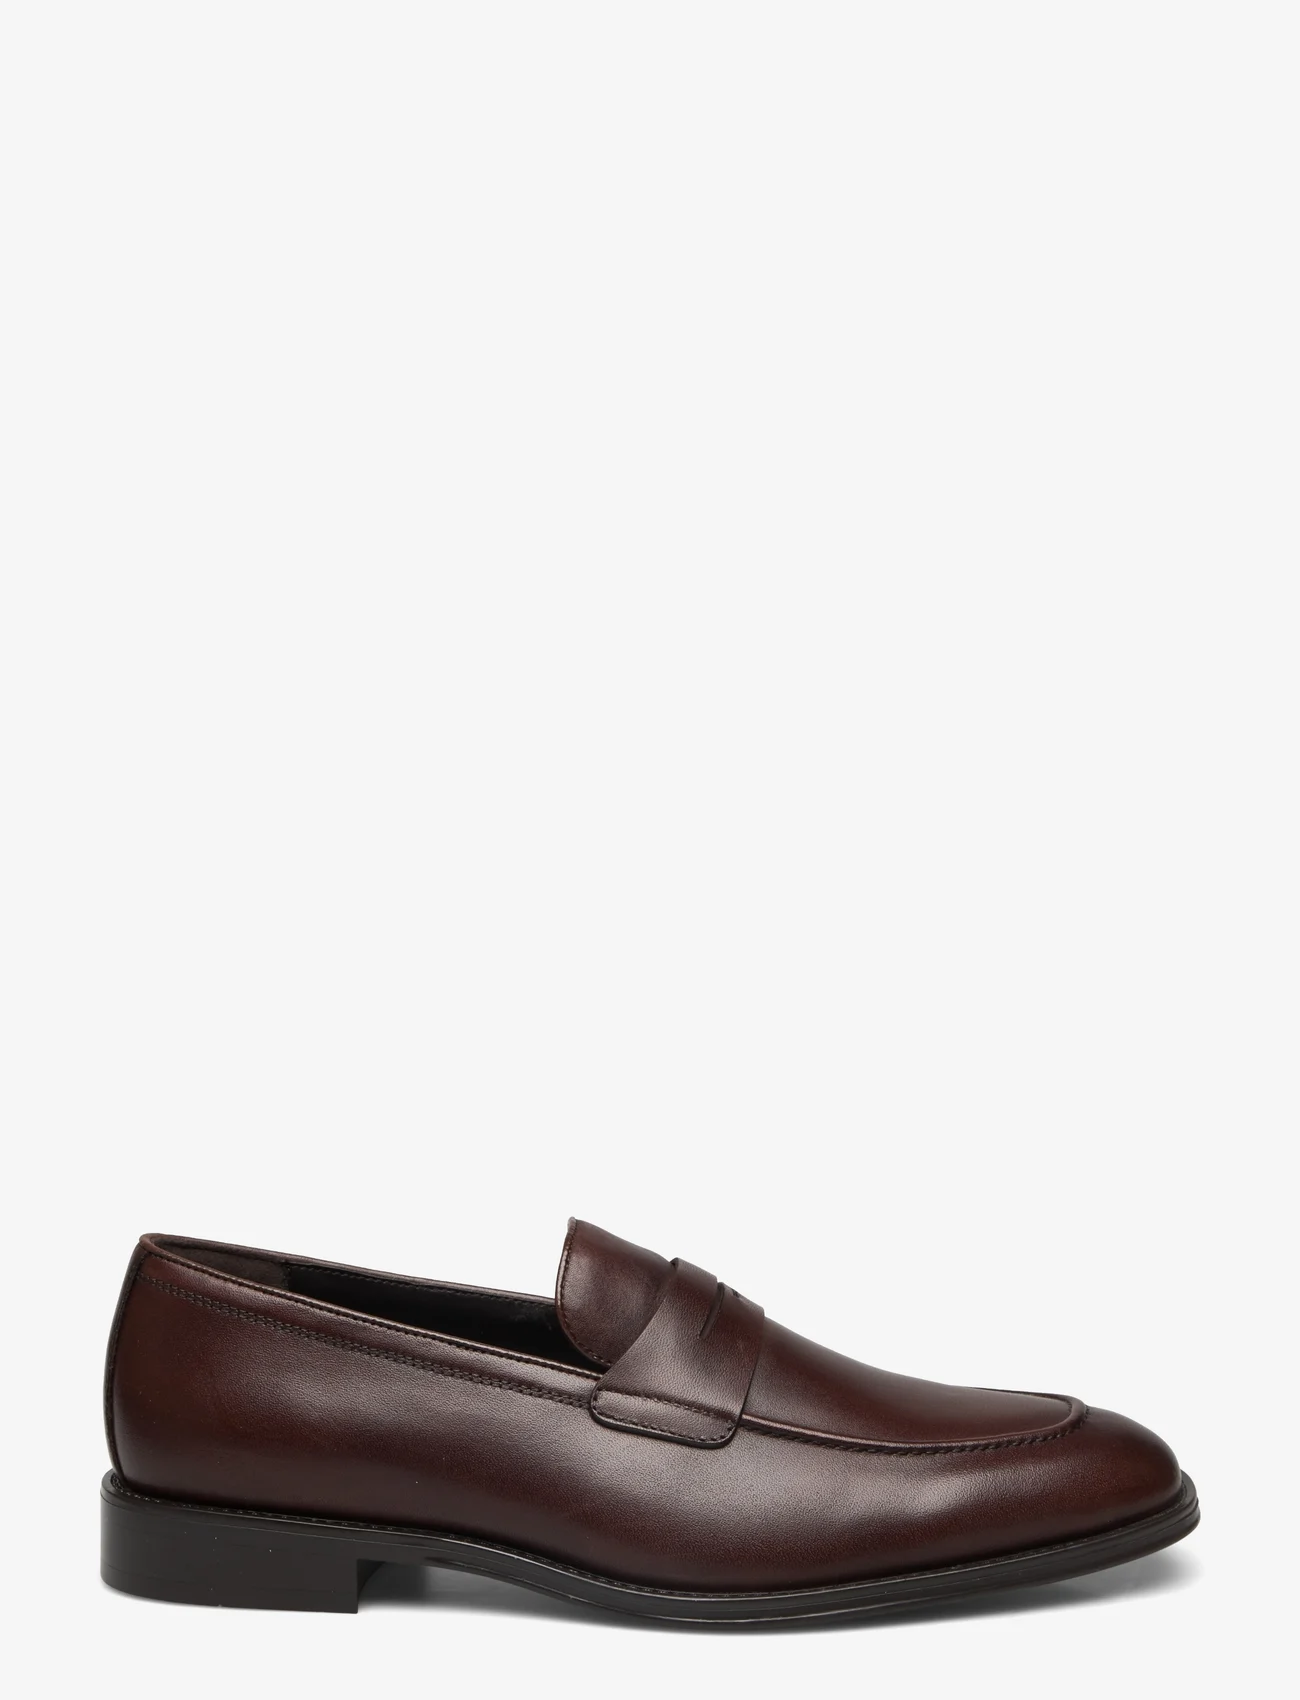 Mango - Aged-leather loafers - laksko - brown - 1